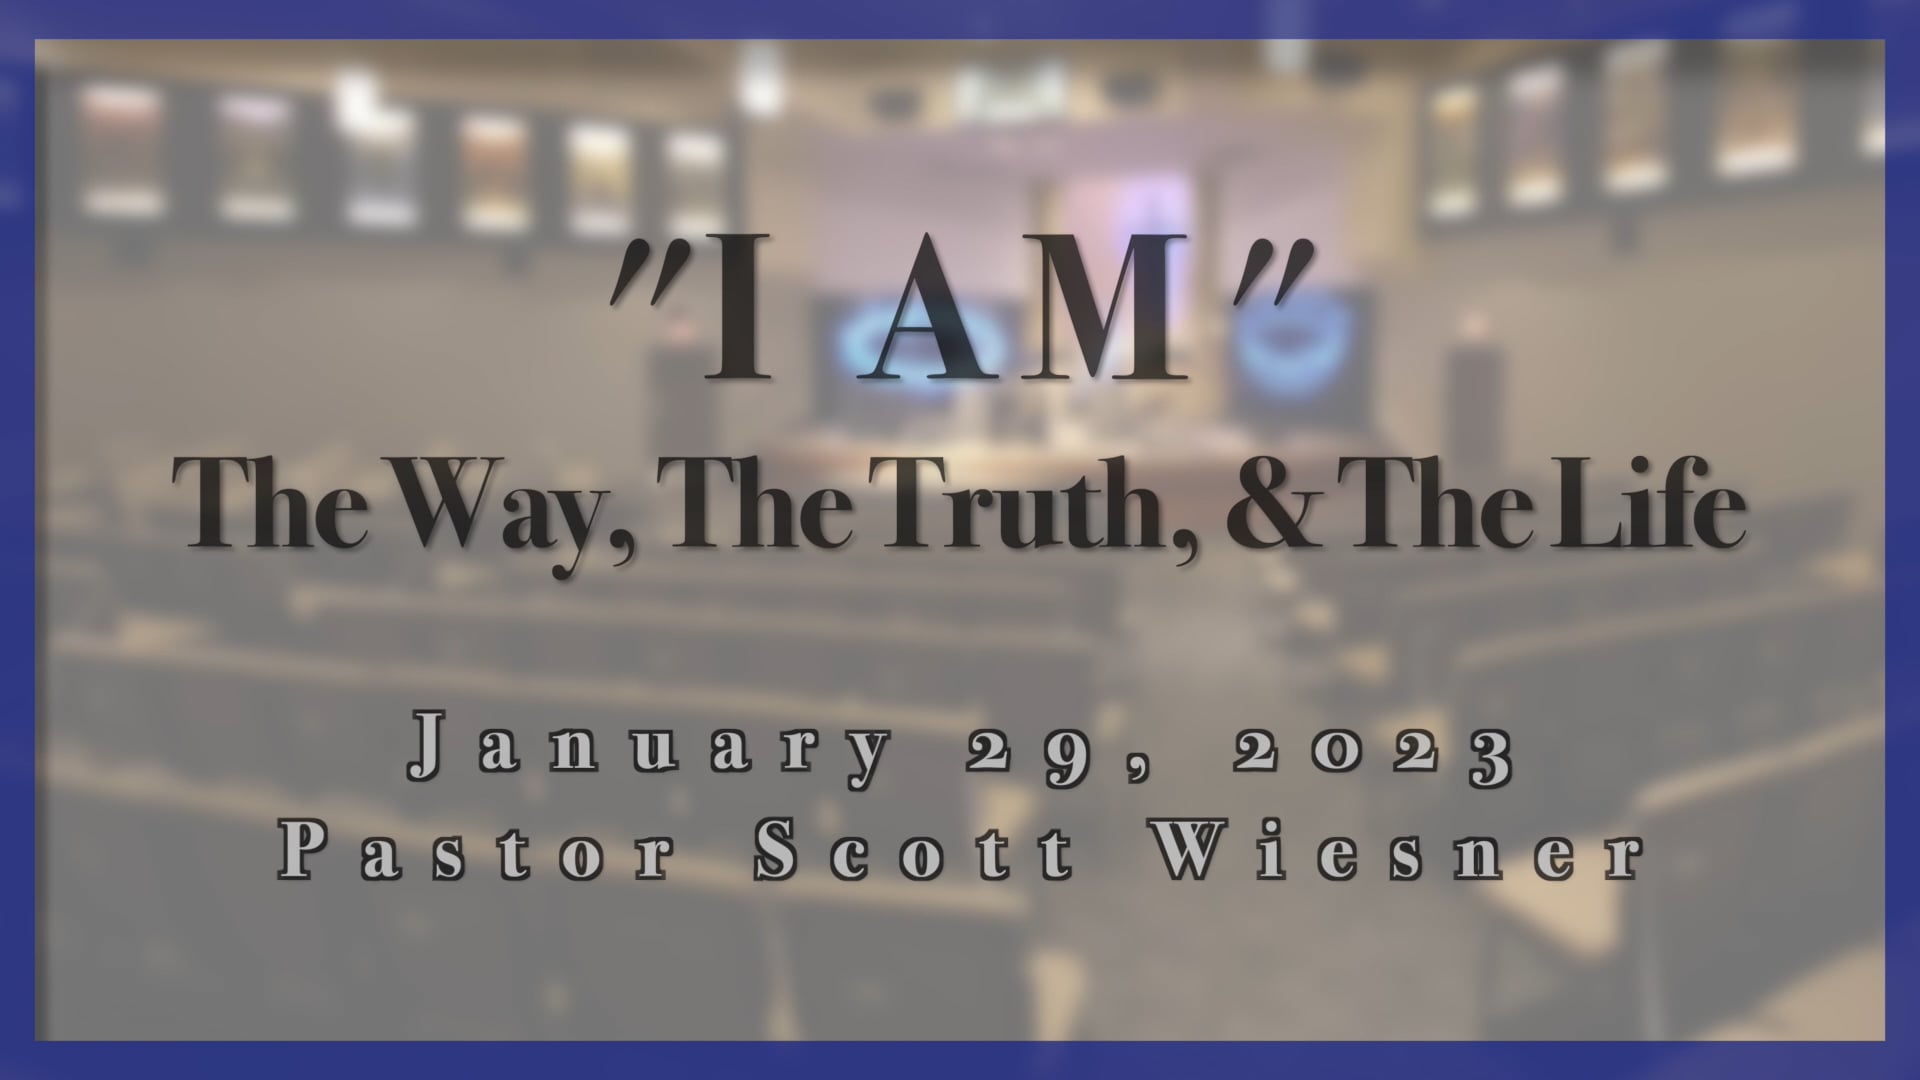 January 29, 2023 - Scott Wiesner - I AM the Way, The Truth, & The Life